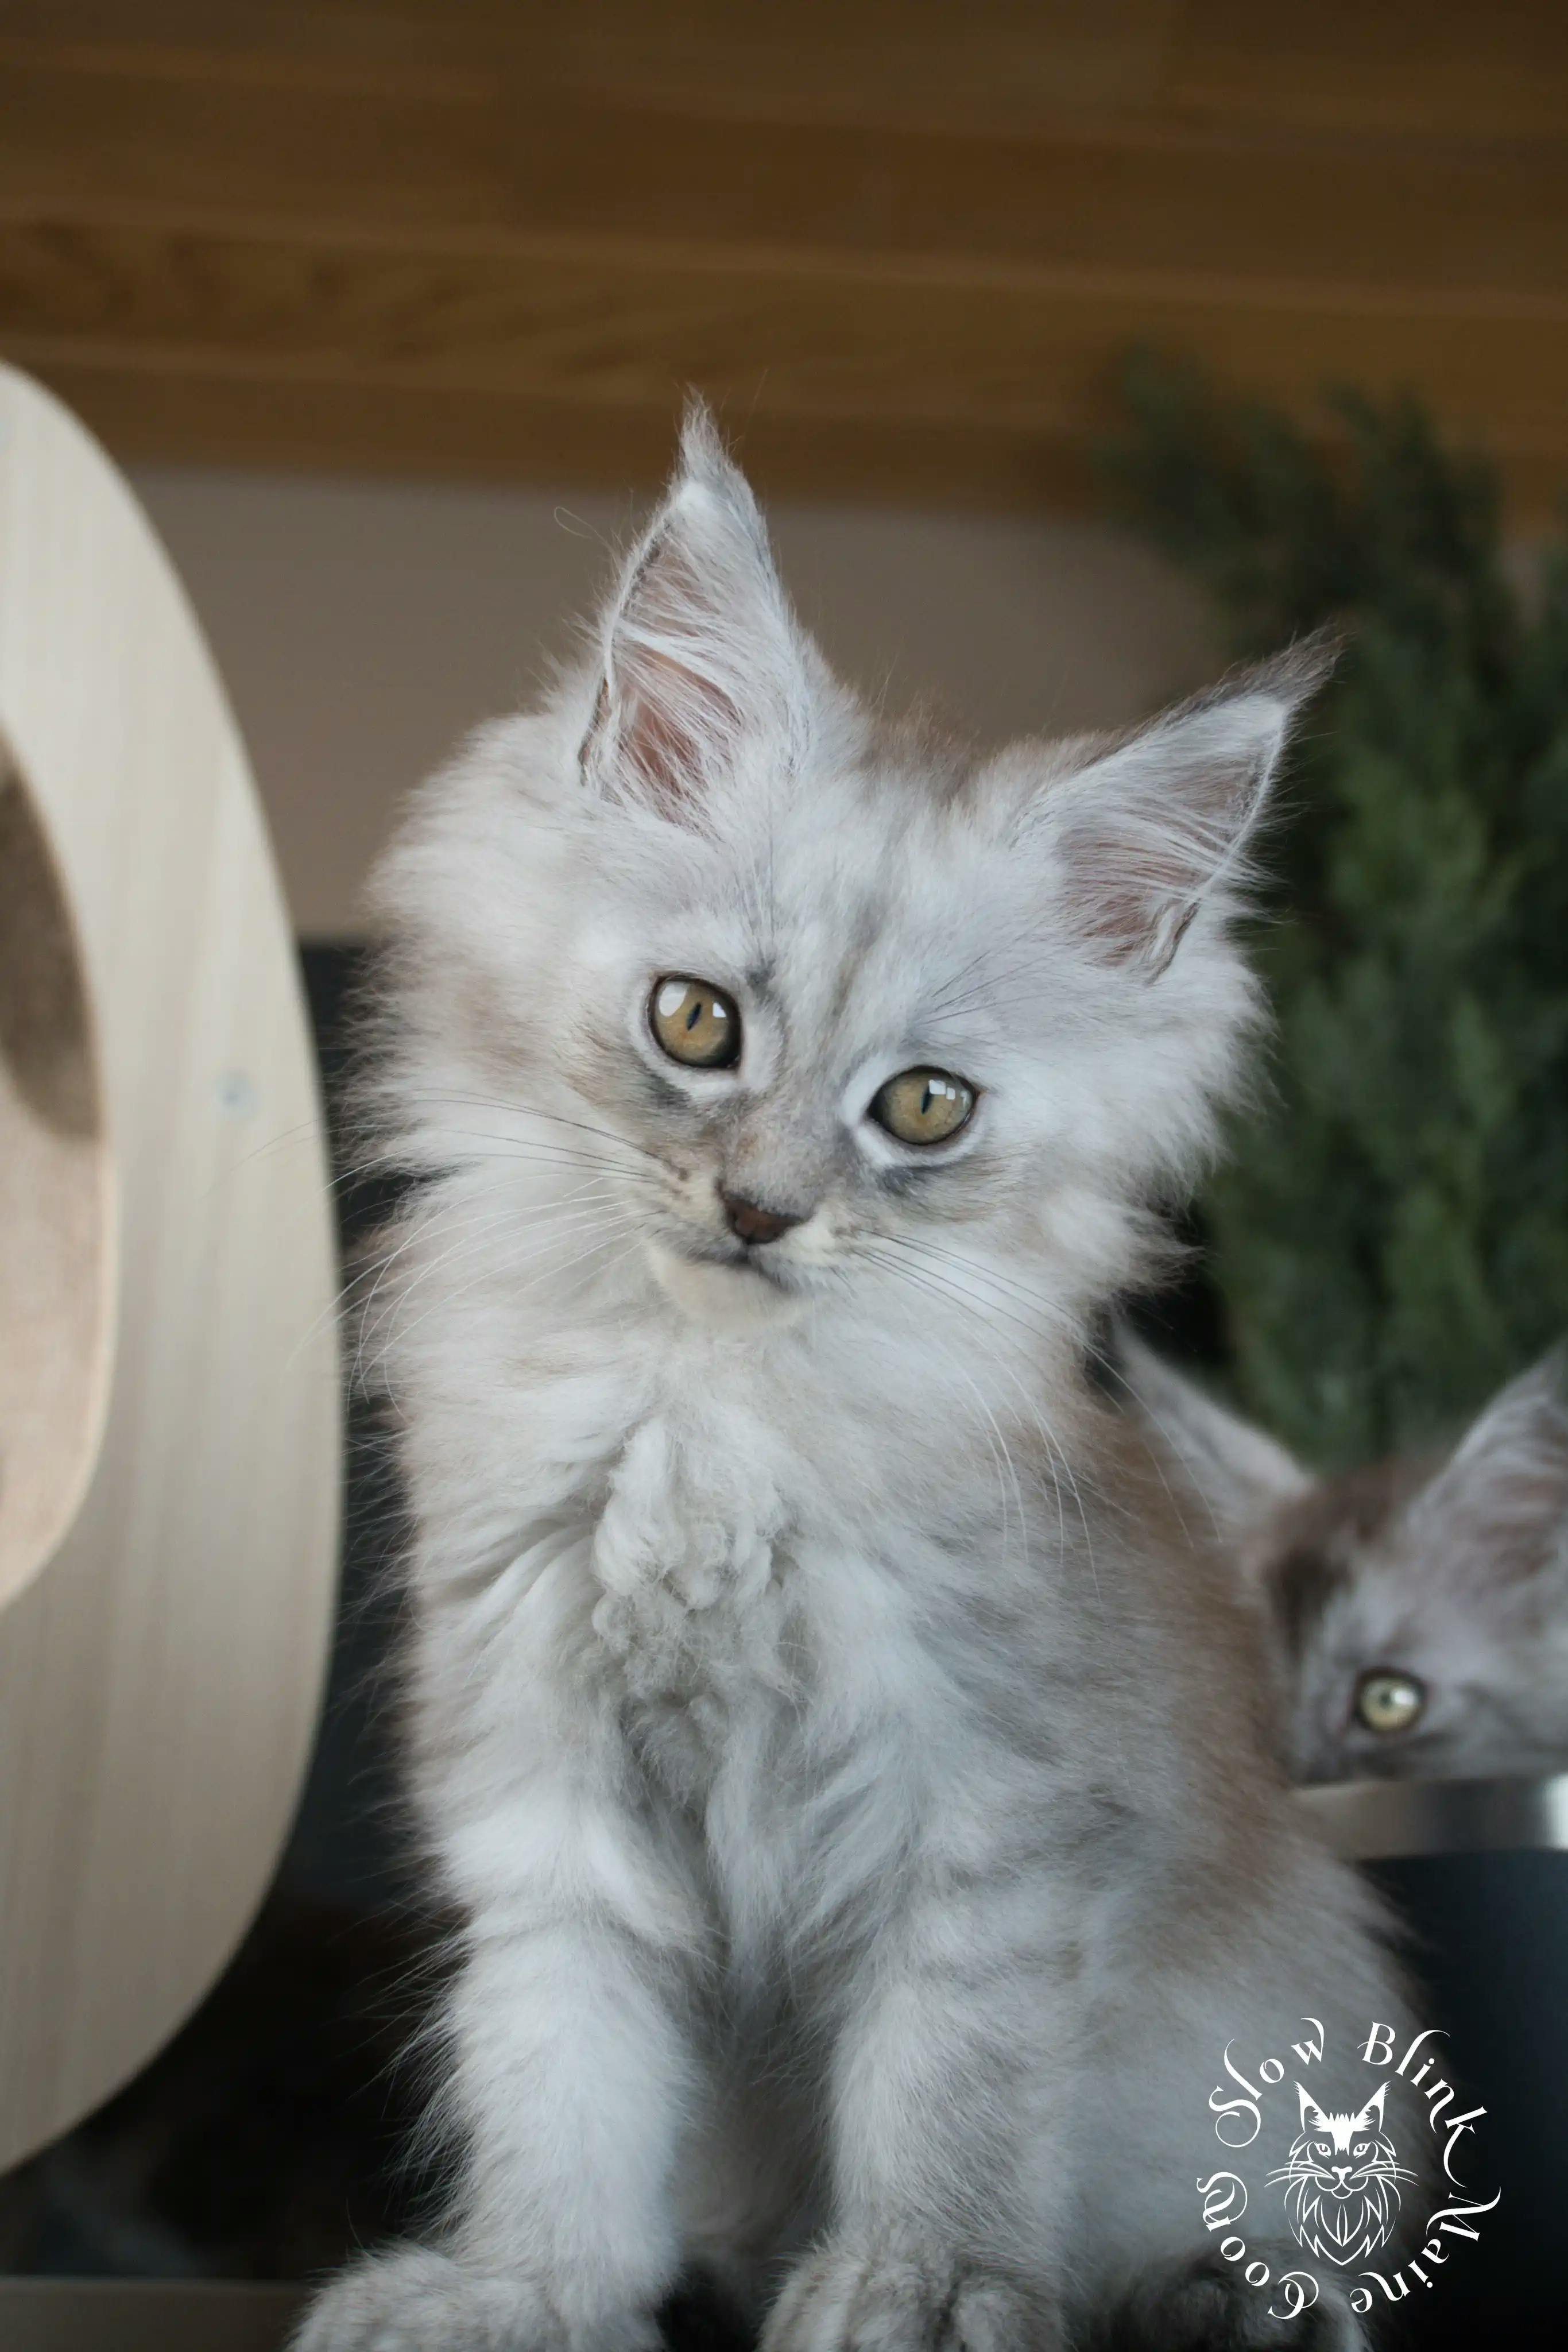 High Silver Maine Coon Kittens > black silver tabby maine coon kitten | ems code ns 22 23 24 25 | slowblinkmainecoons | 599